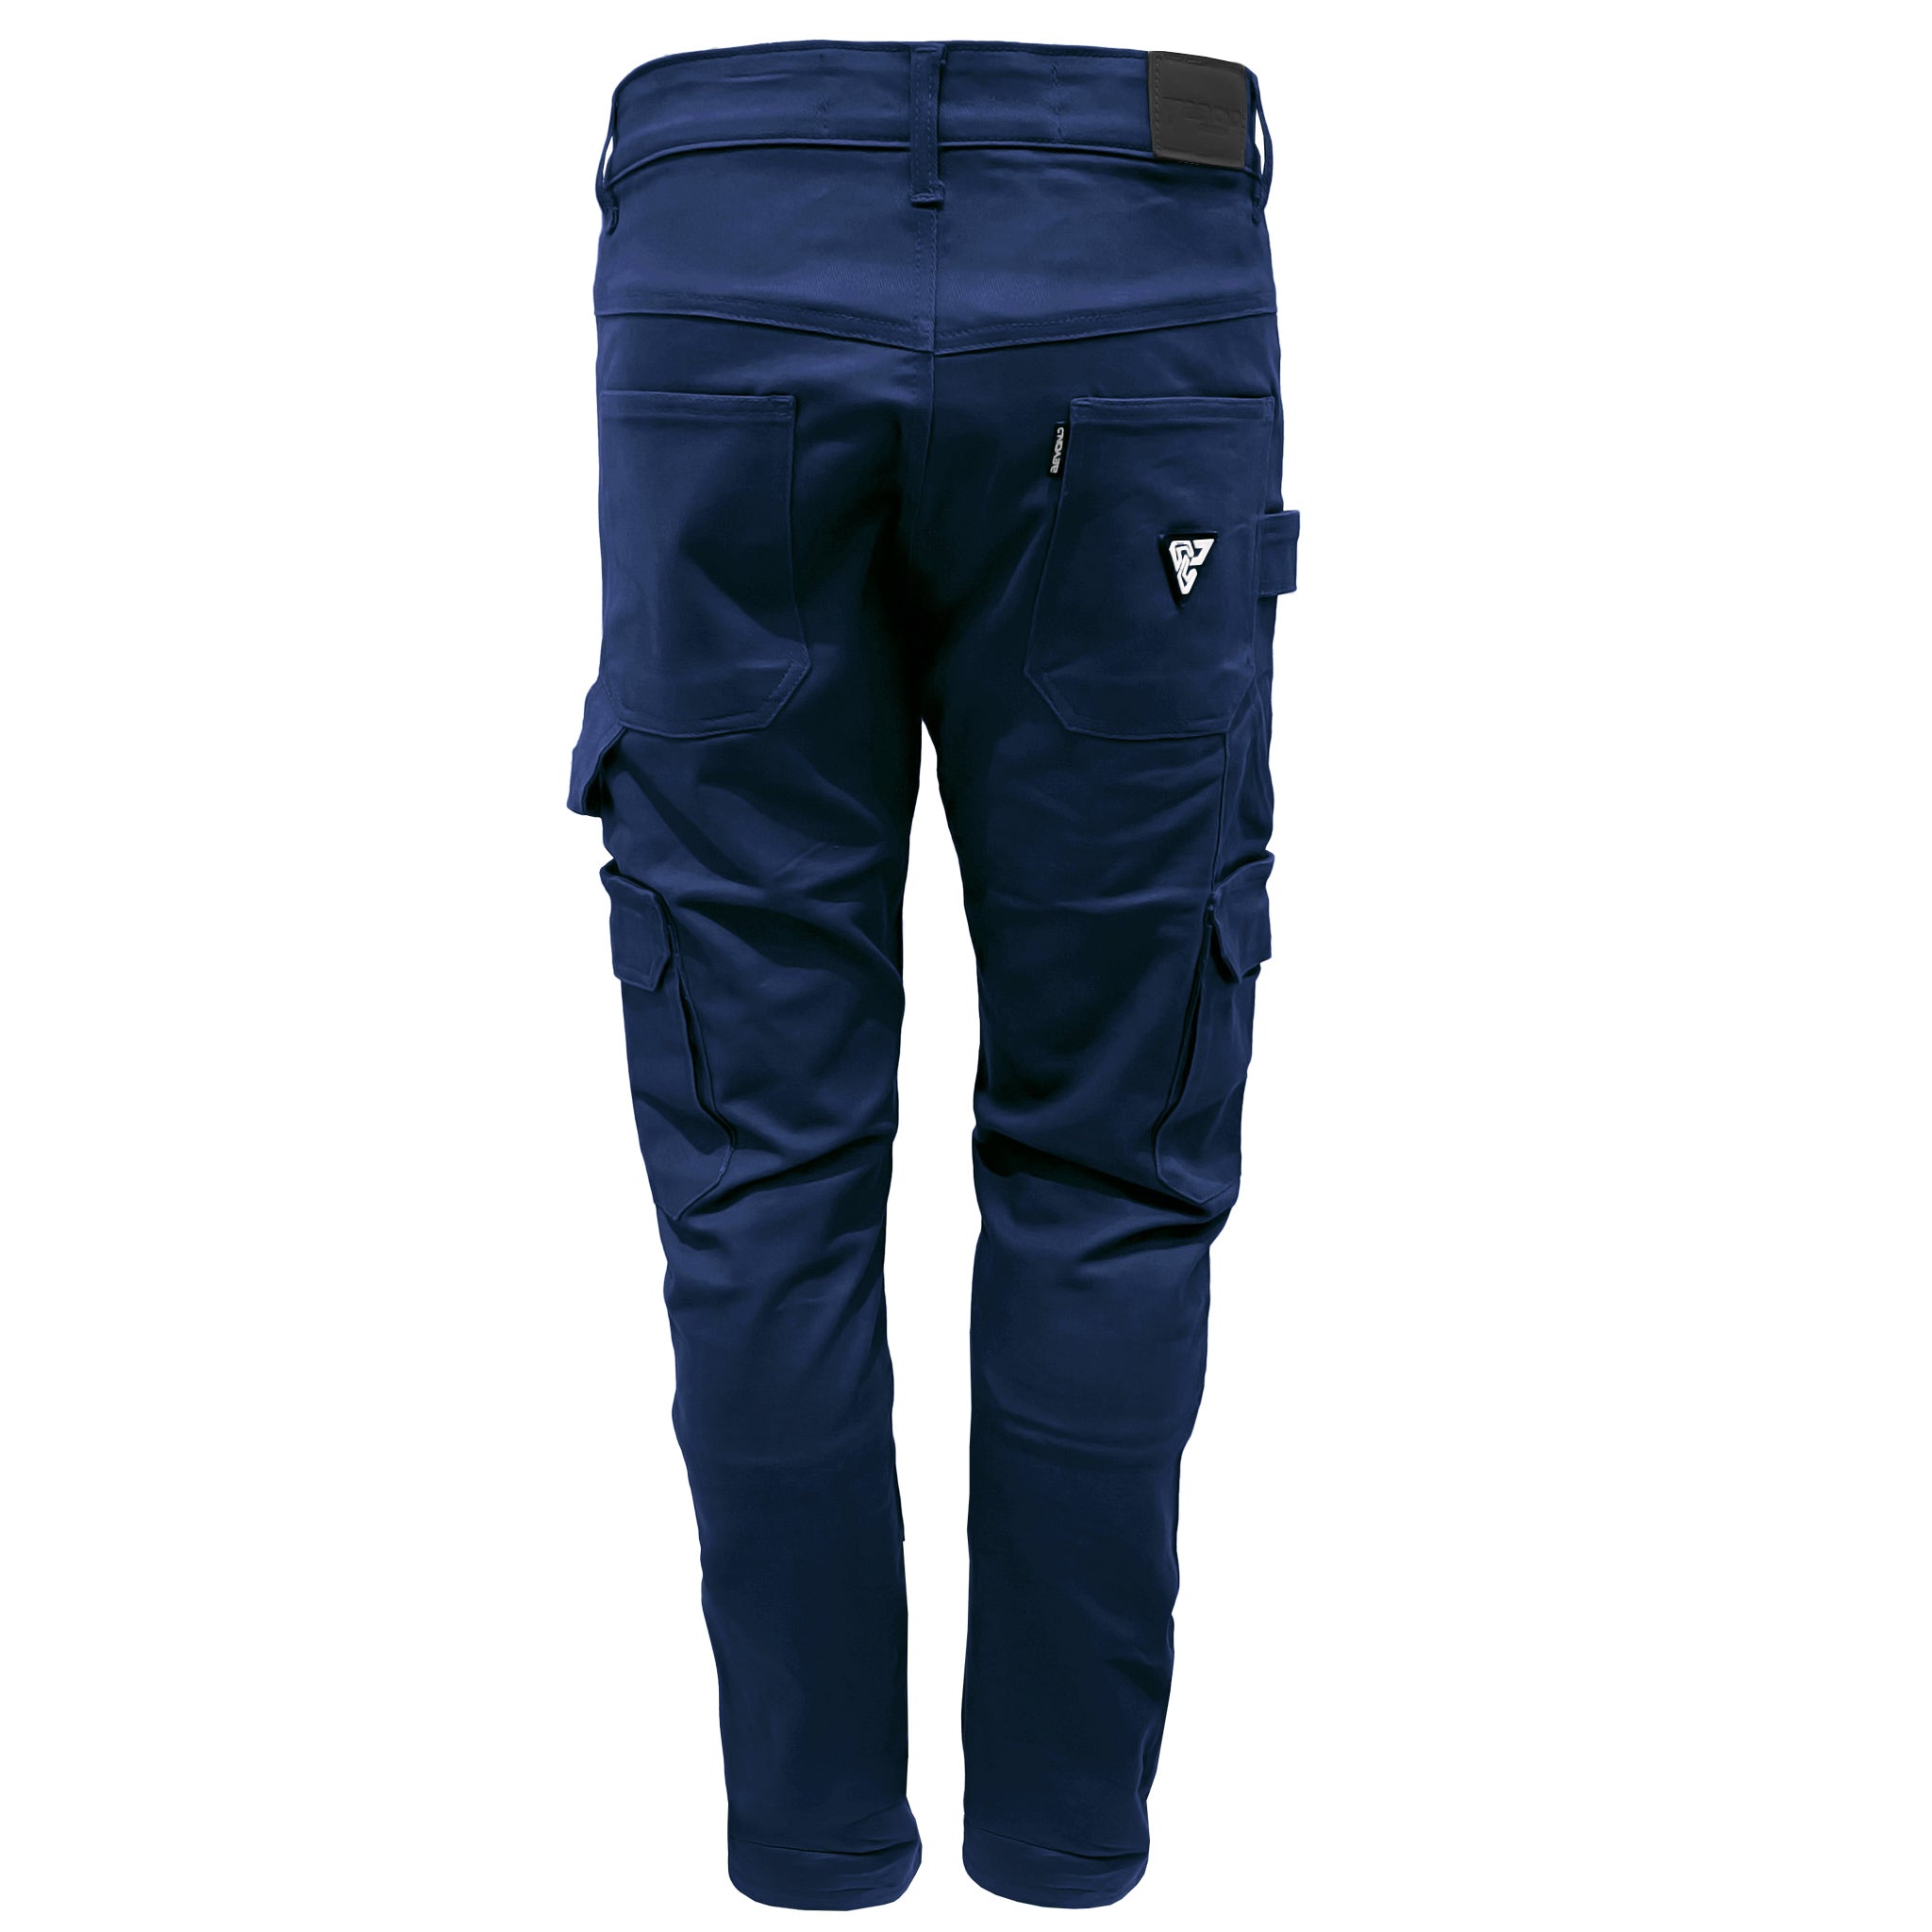 Straight Leg Cargo Pants - Navy Blue with Pads